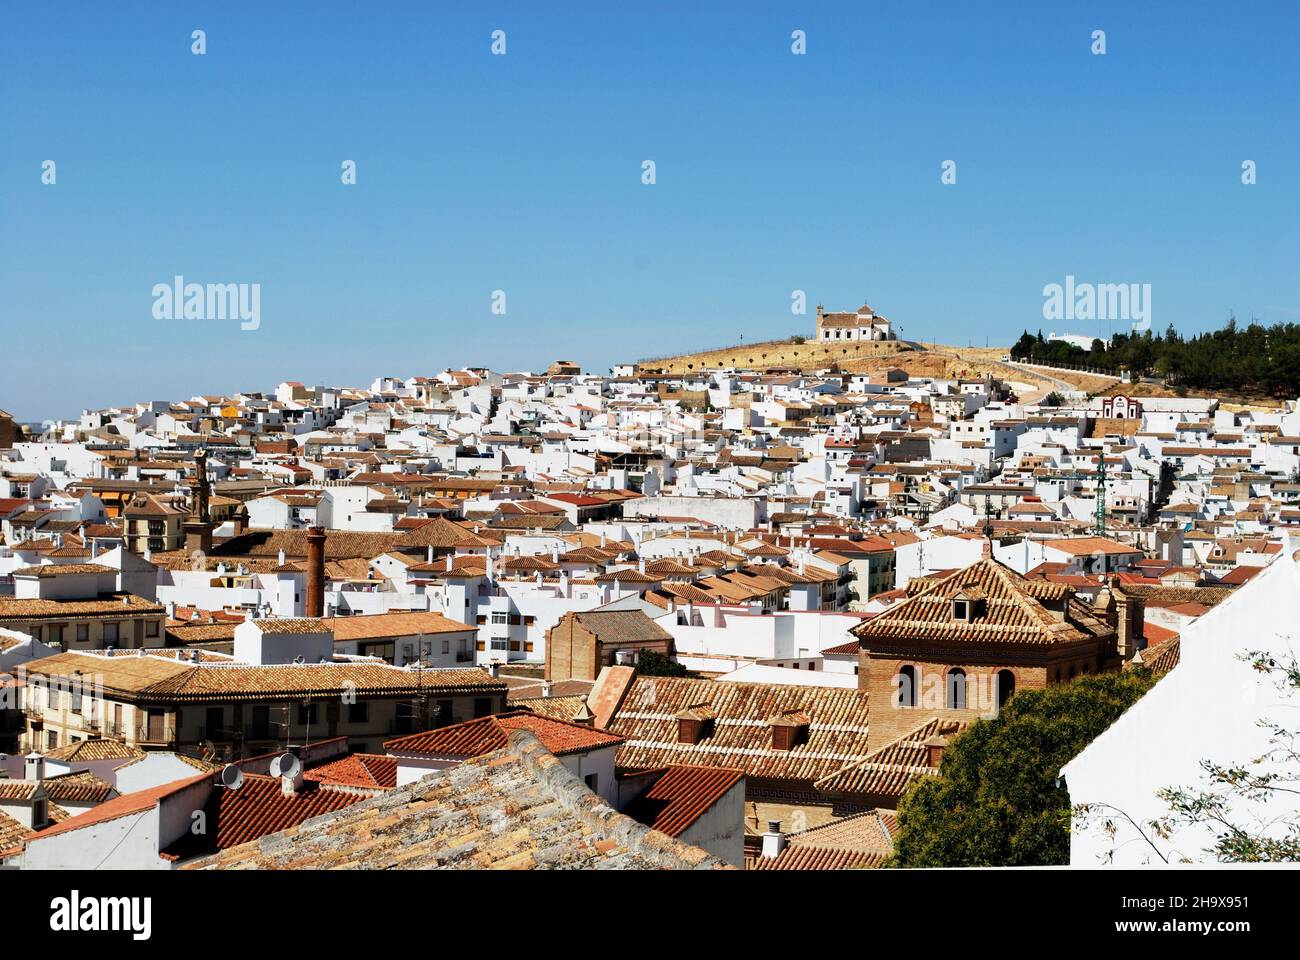 View over the rooftops looking North West, Antequera, Andalusia, Spain. Stock Photo